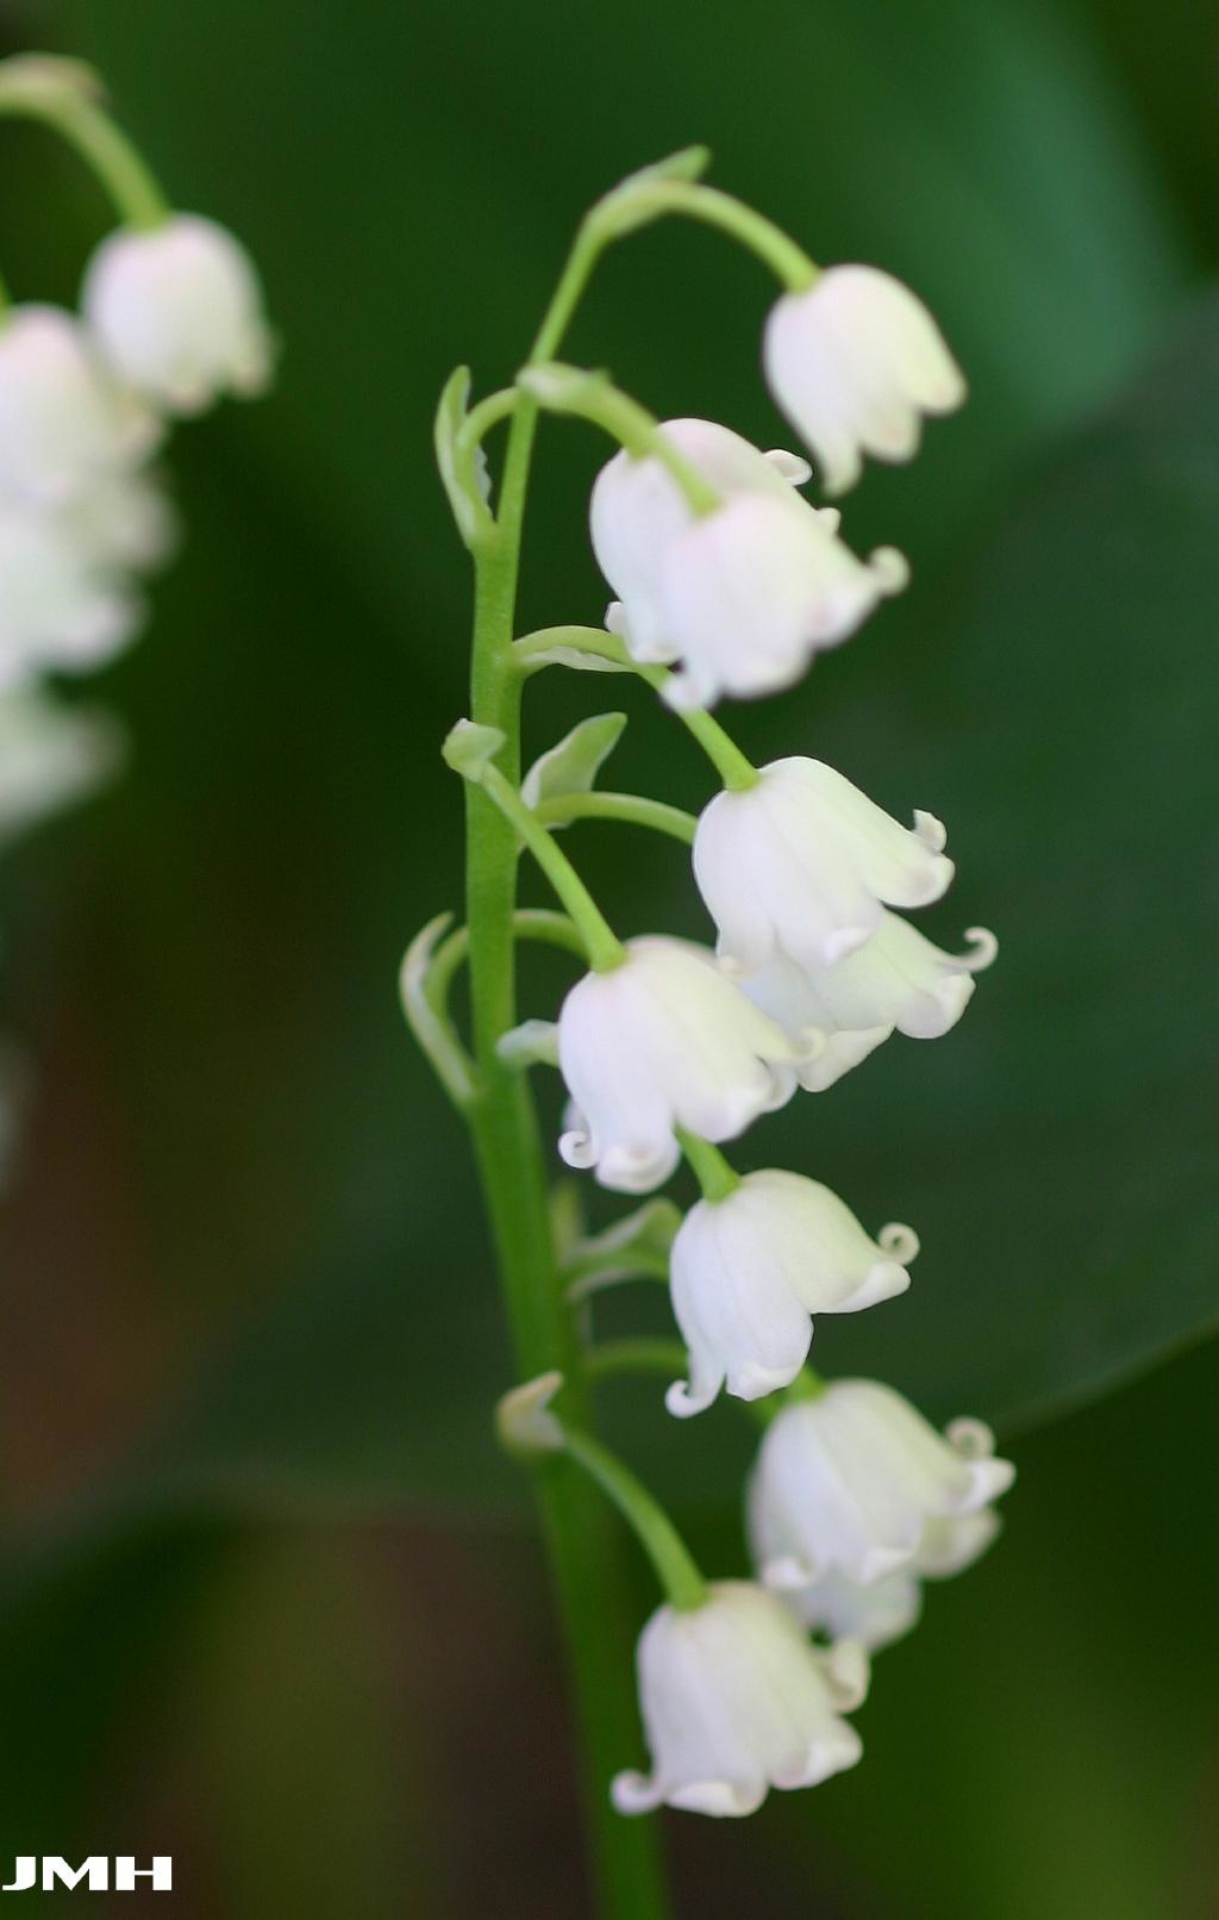 Lily of the valley | The Morton Arboretum